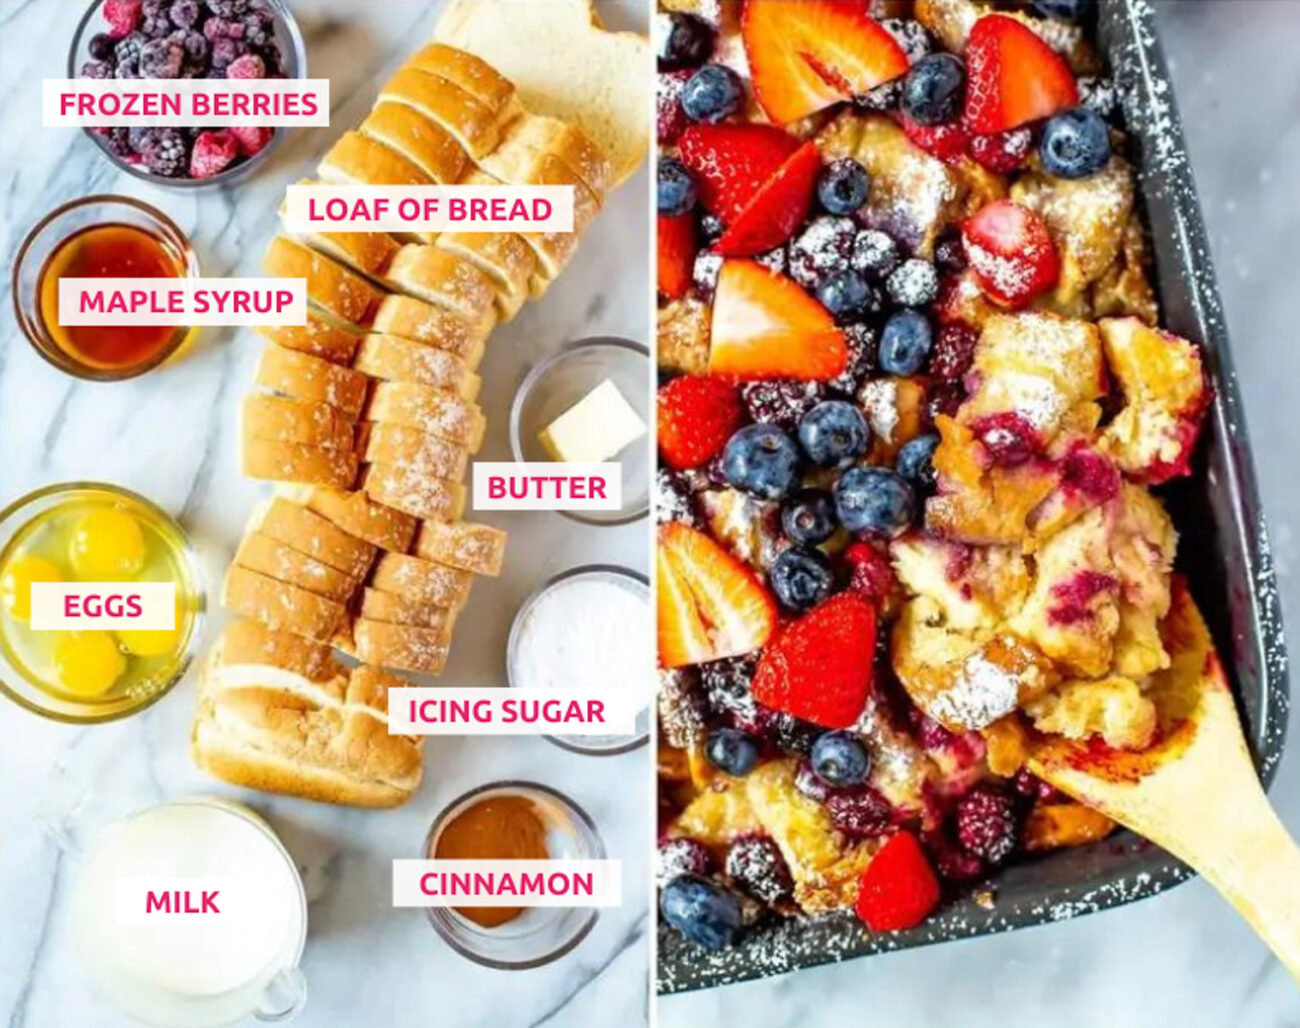 Ingredients for french toast casserole: loaf of bread, berries, maple syrup, eggs, butter, milk, cinnamon and icing sugar.